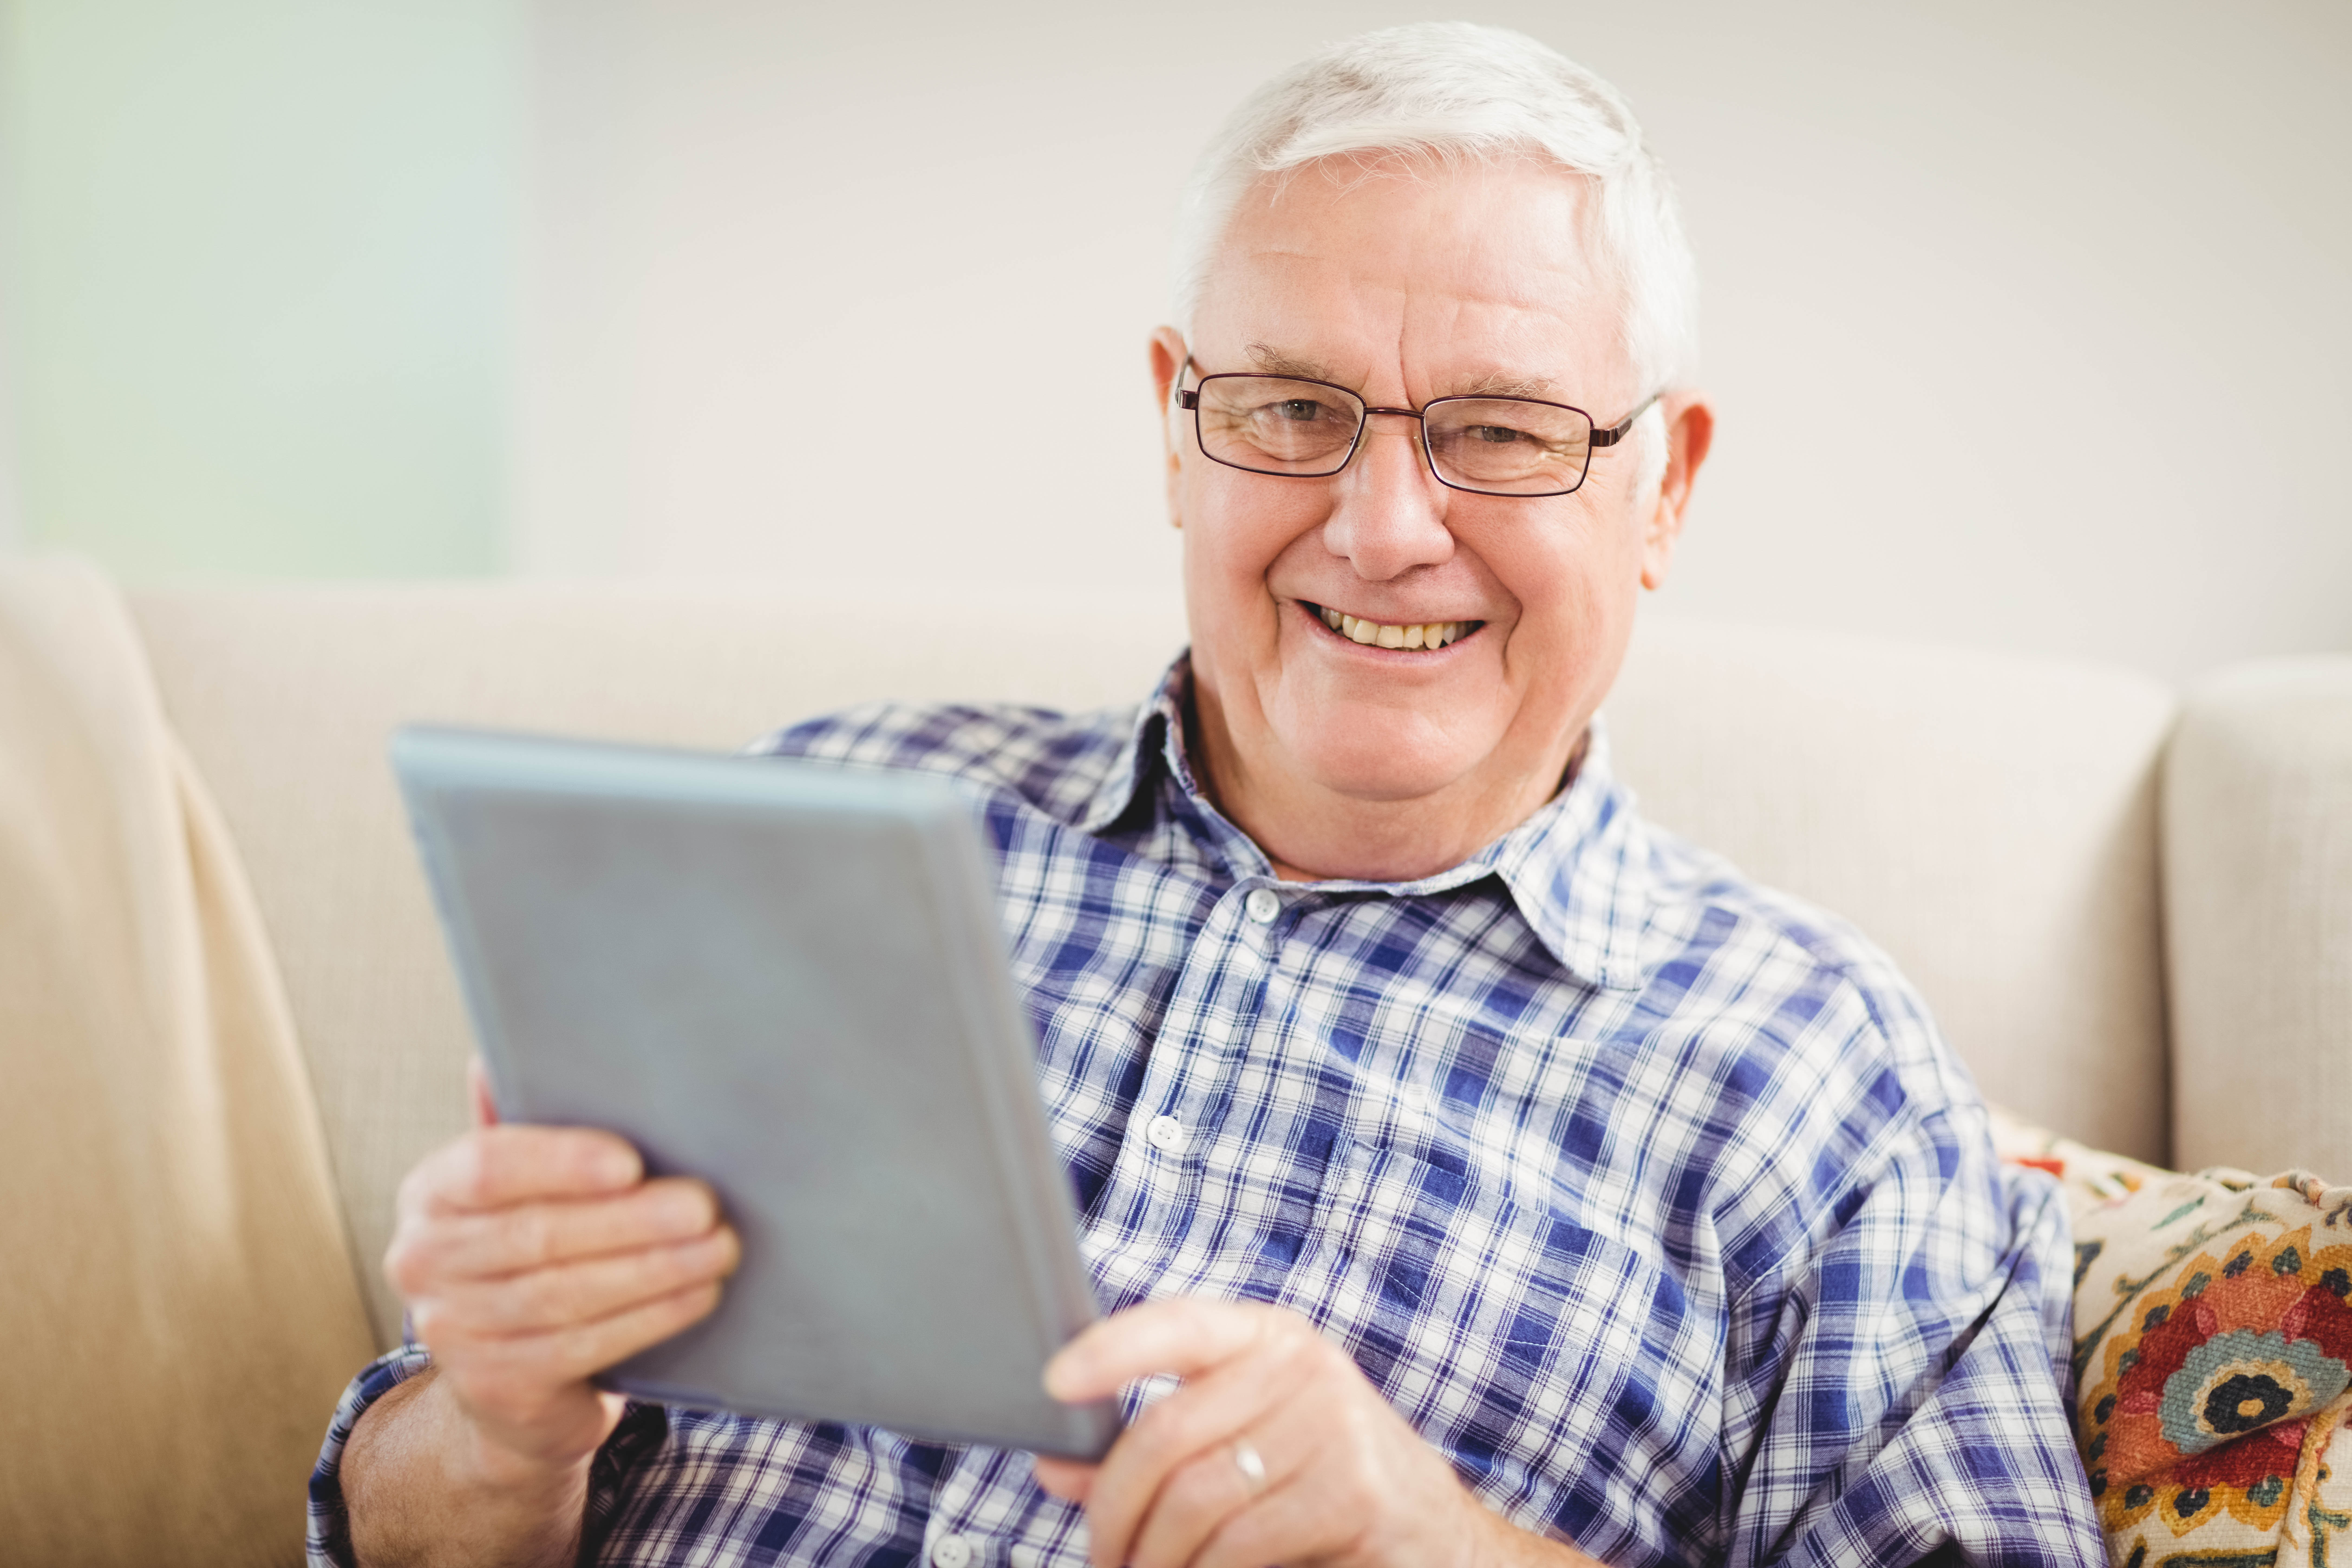 Senior man smiling and using a tablet.